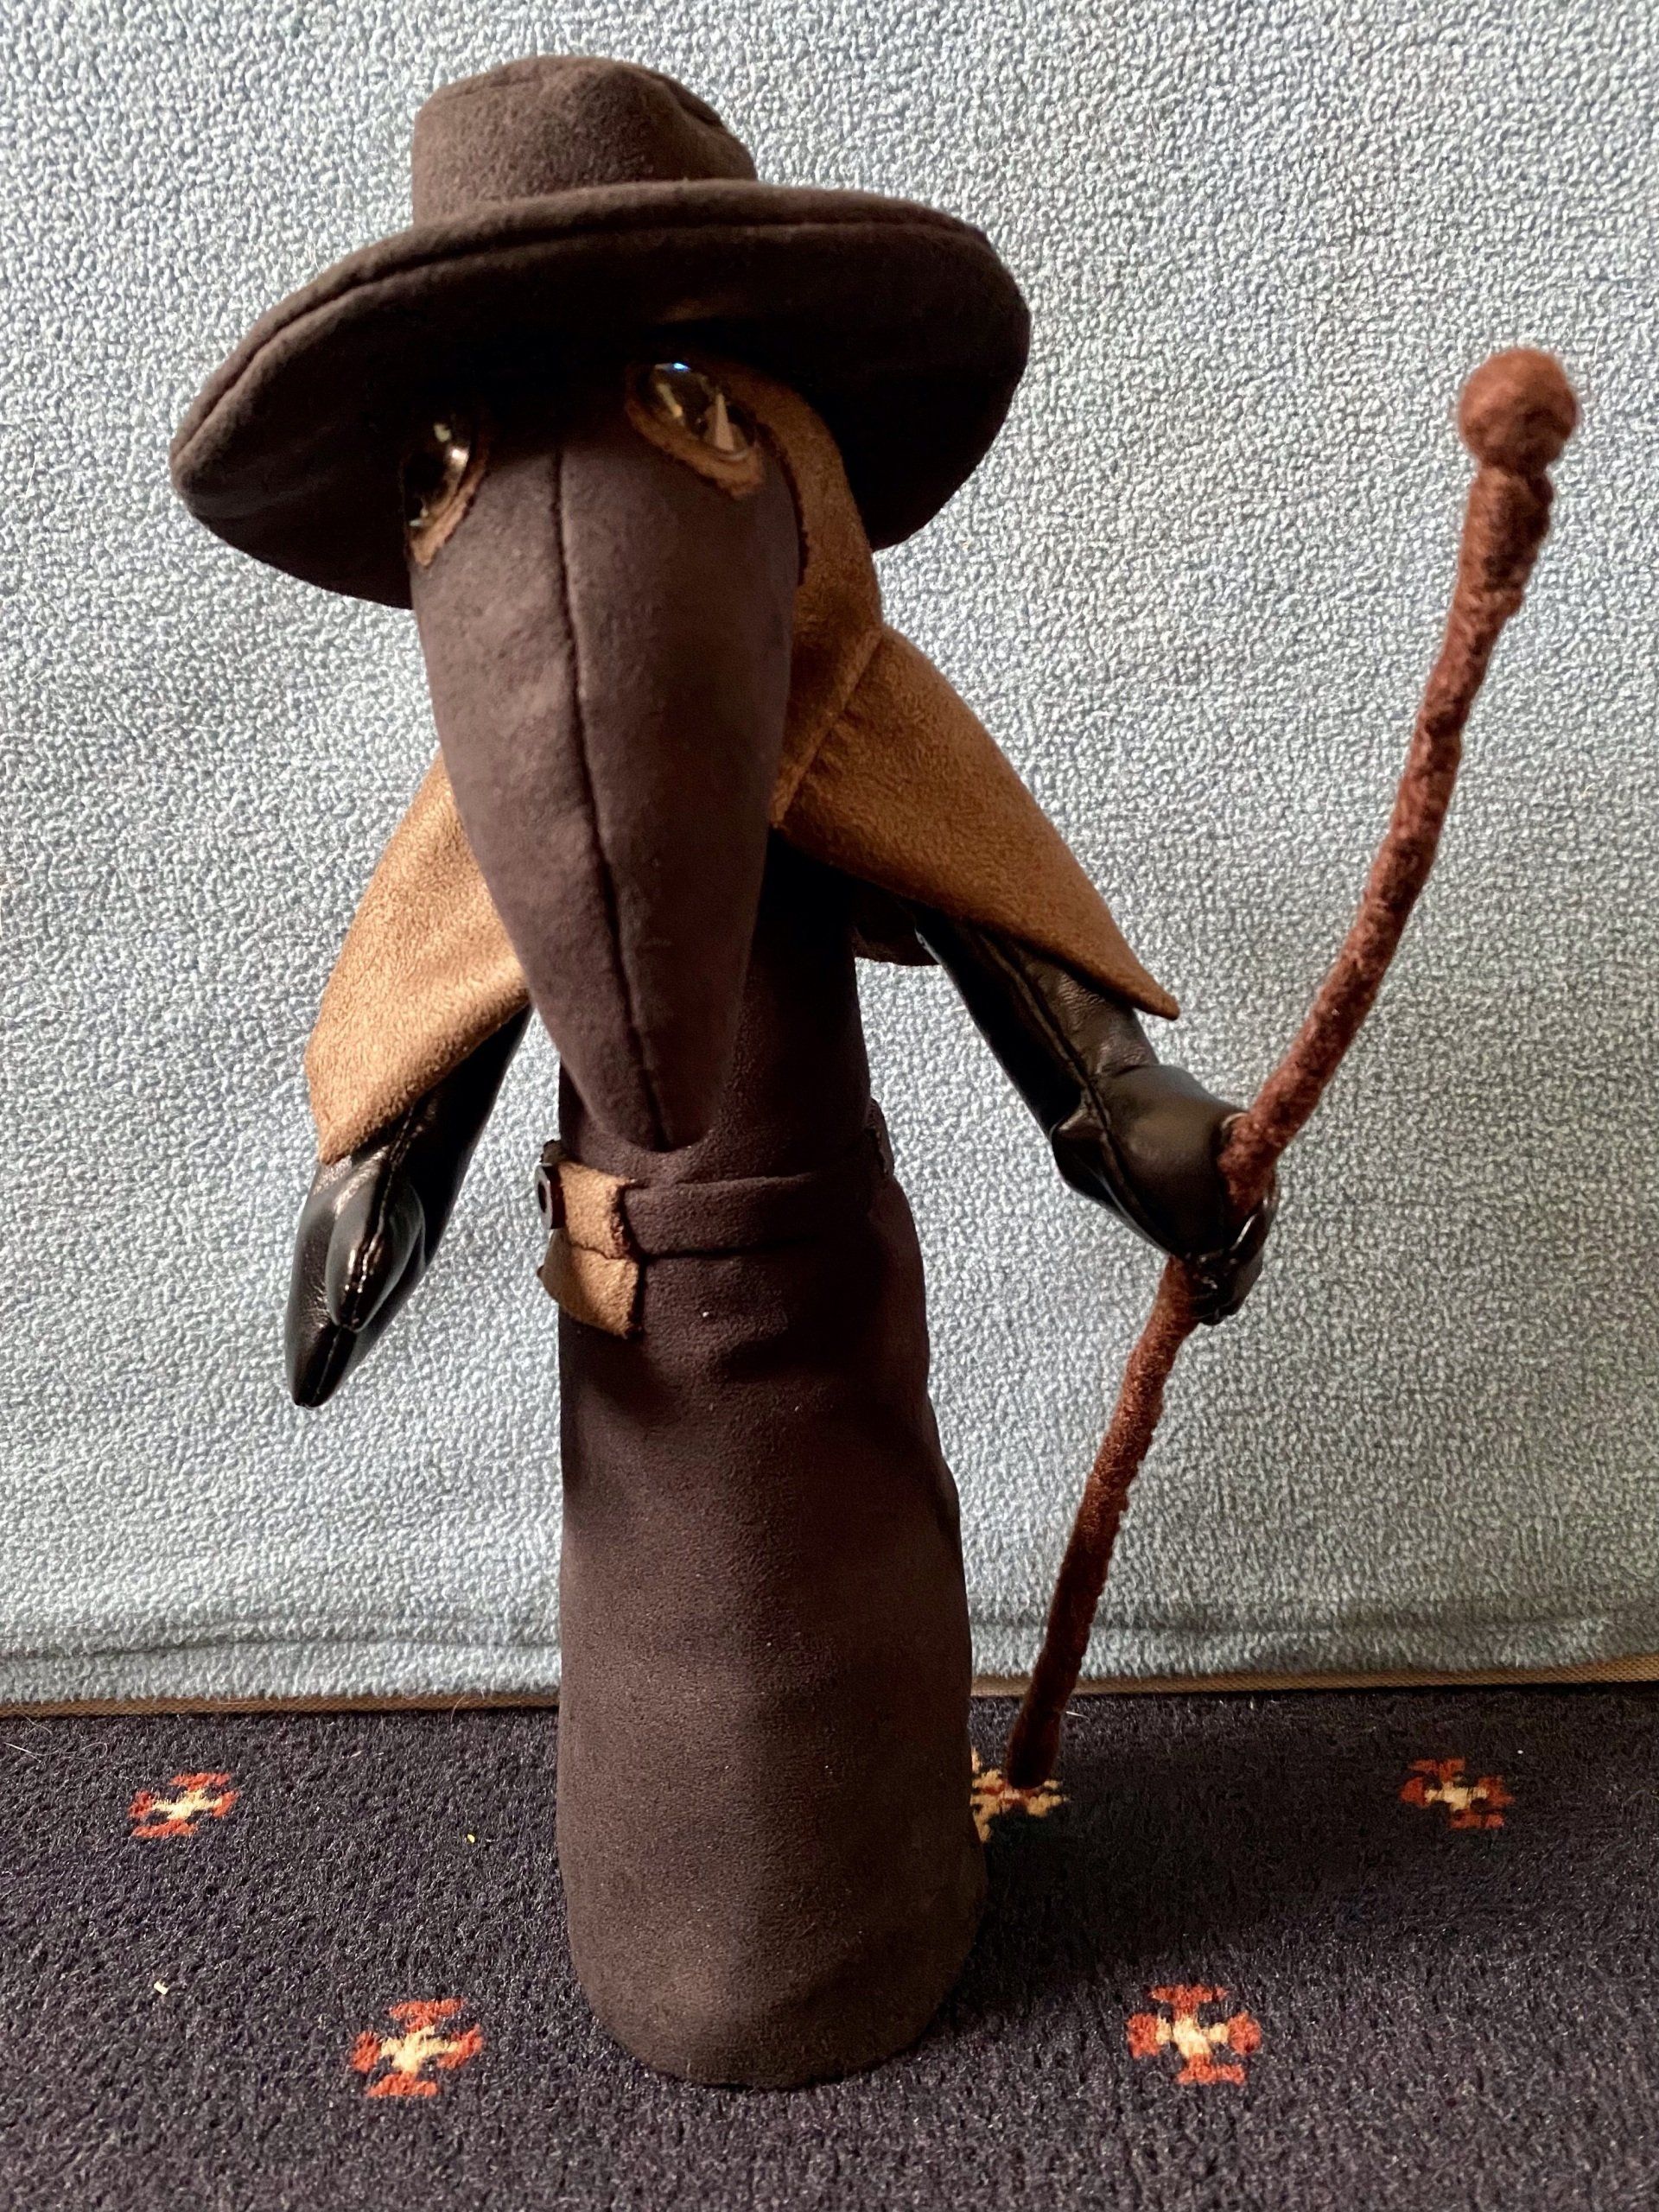 Plague Doctor by Sharon